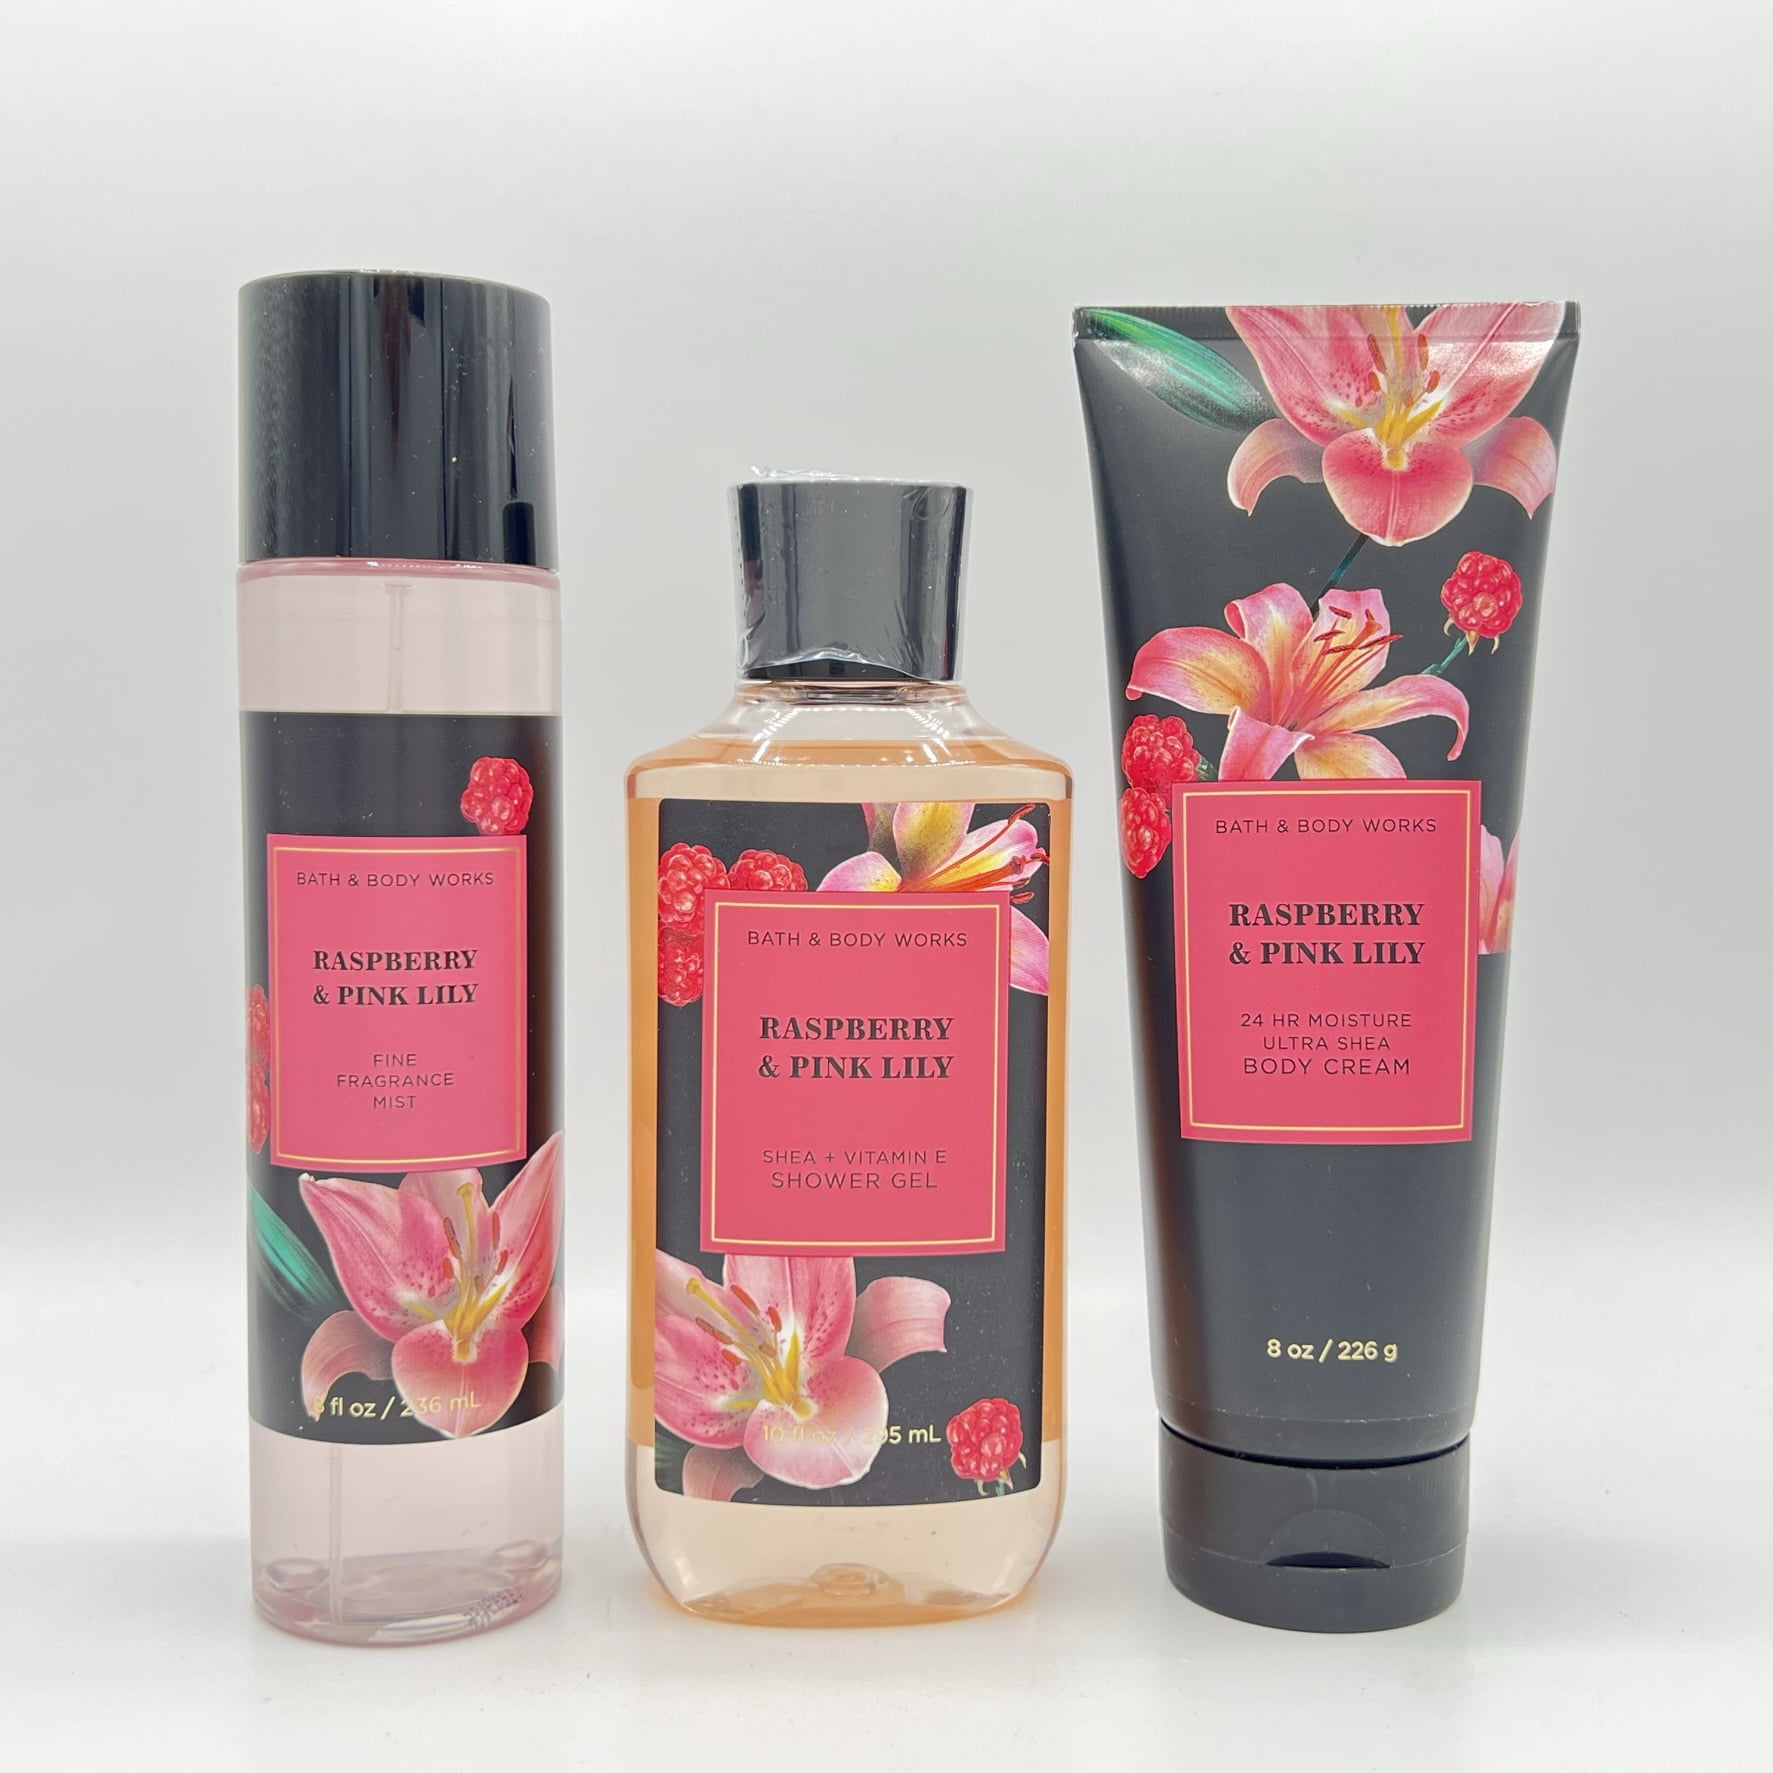 Bath And Body Works Raspberry And Pink Lily Fine Fragrance Mist Shower Gel And Body Cream 3